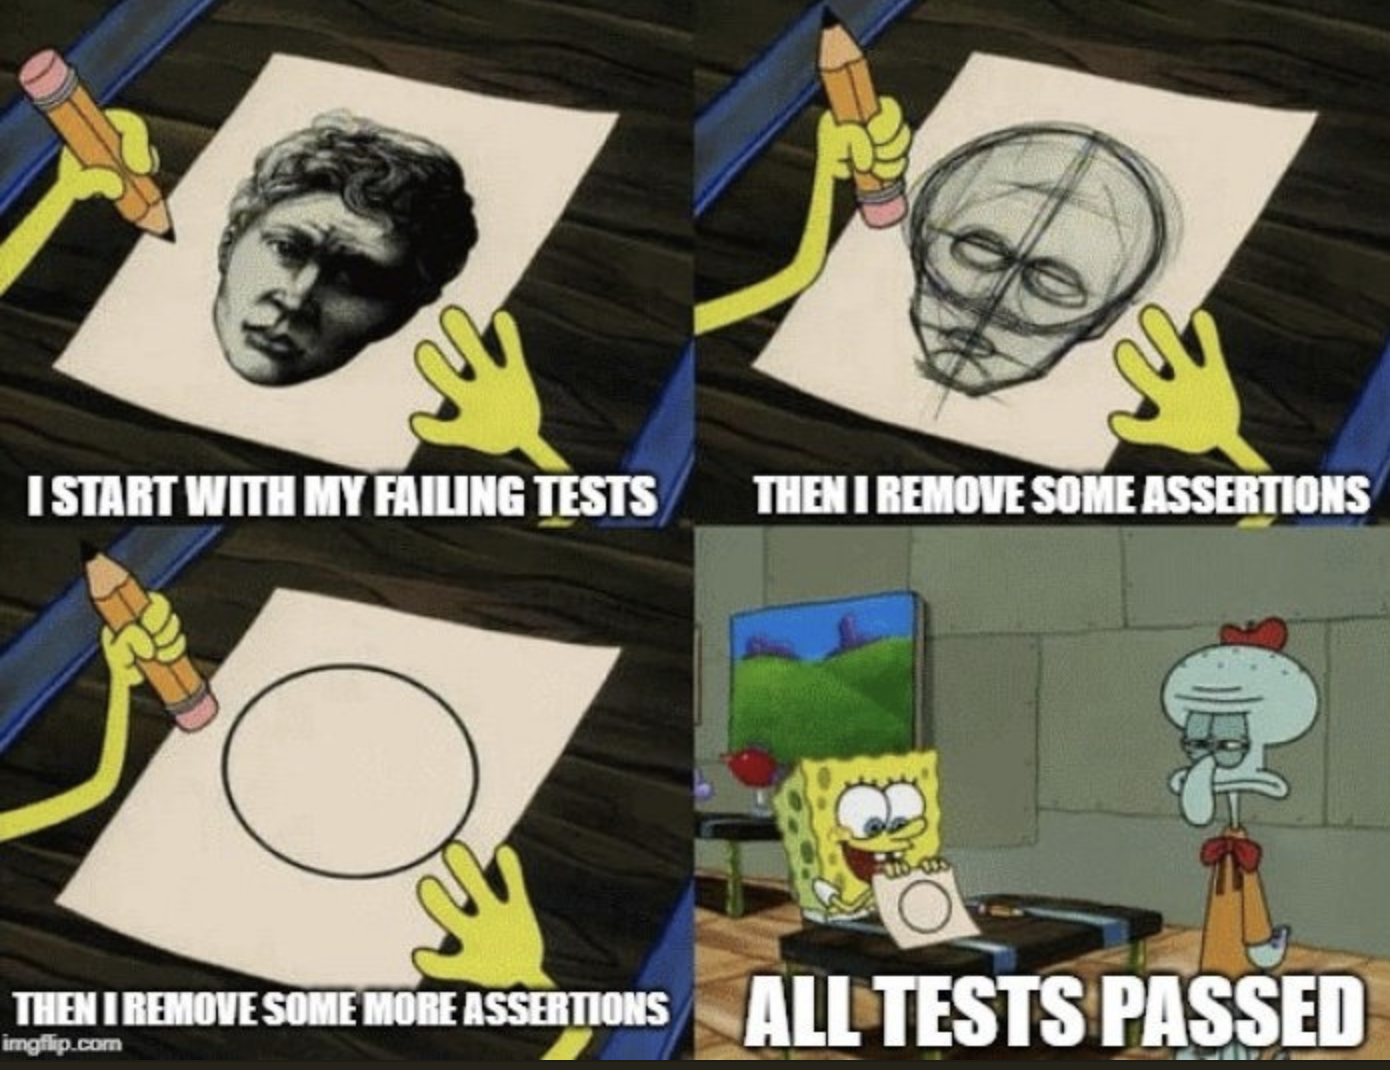 tests.png